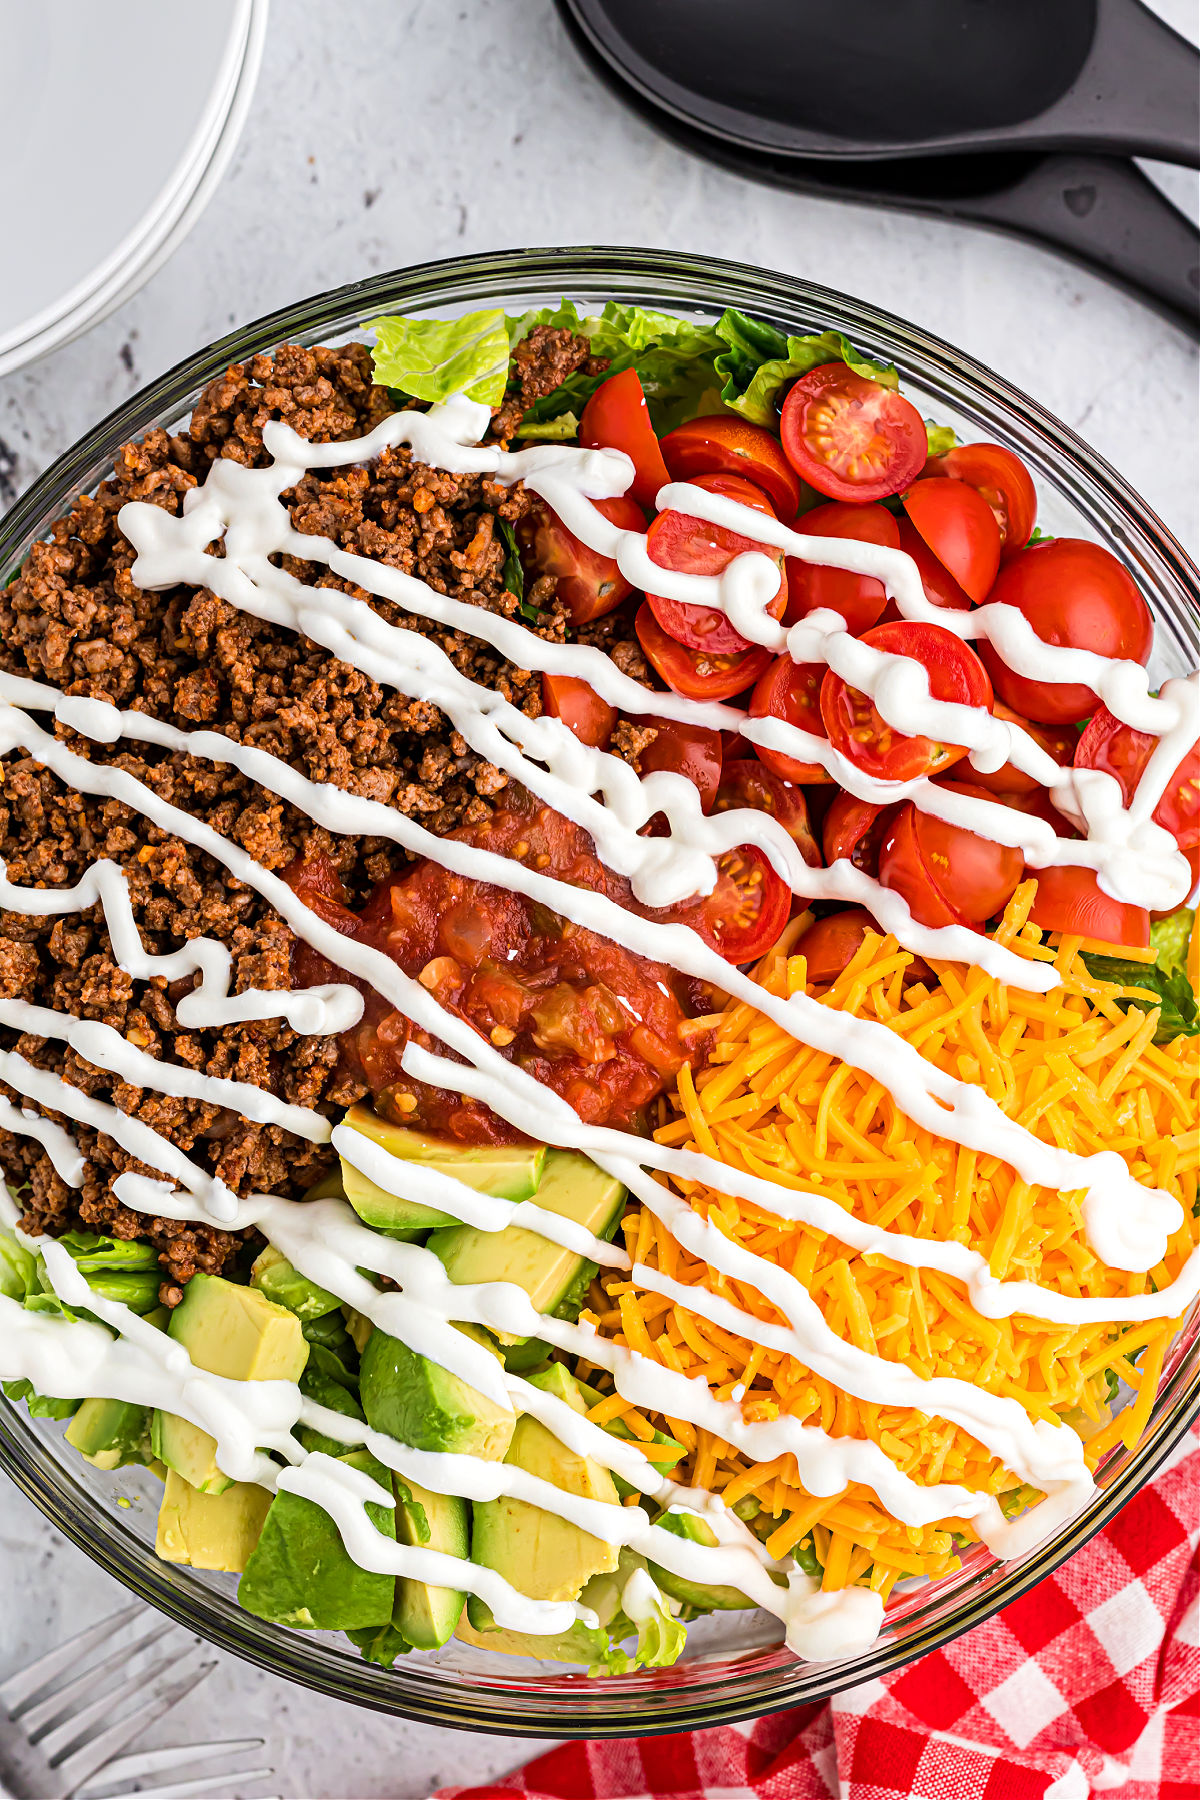 Taco salad ingredients arranged in a serving bowl and drizzled with sour cream.